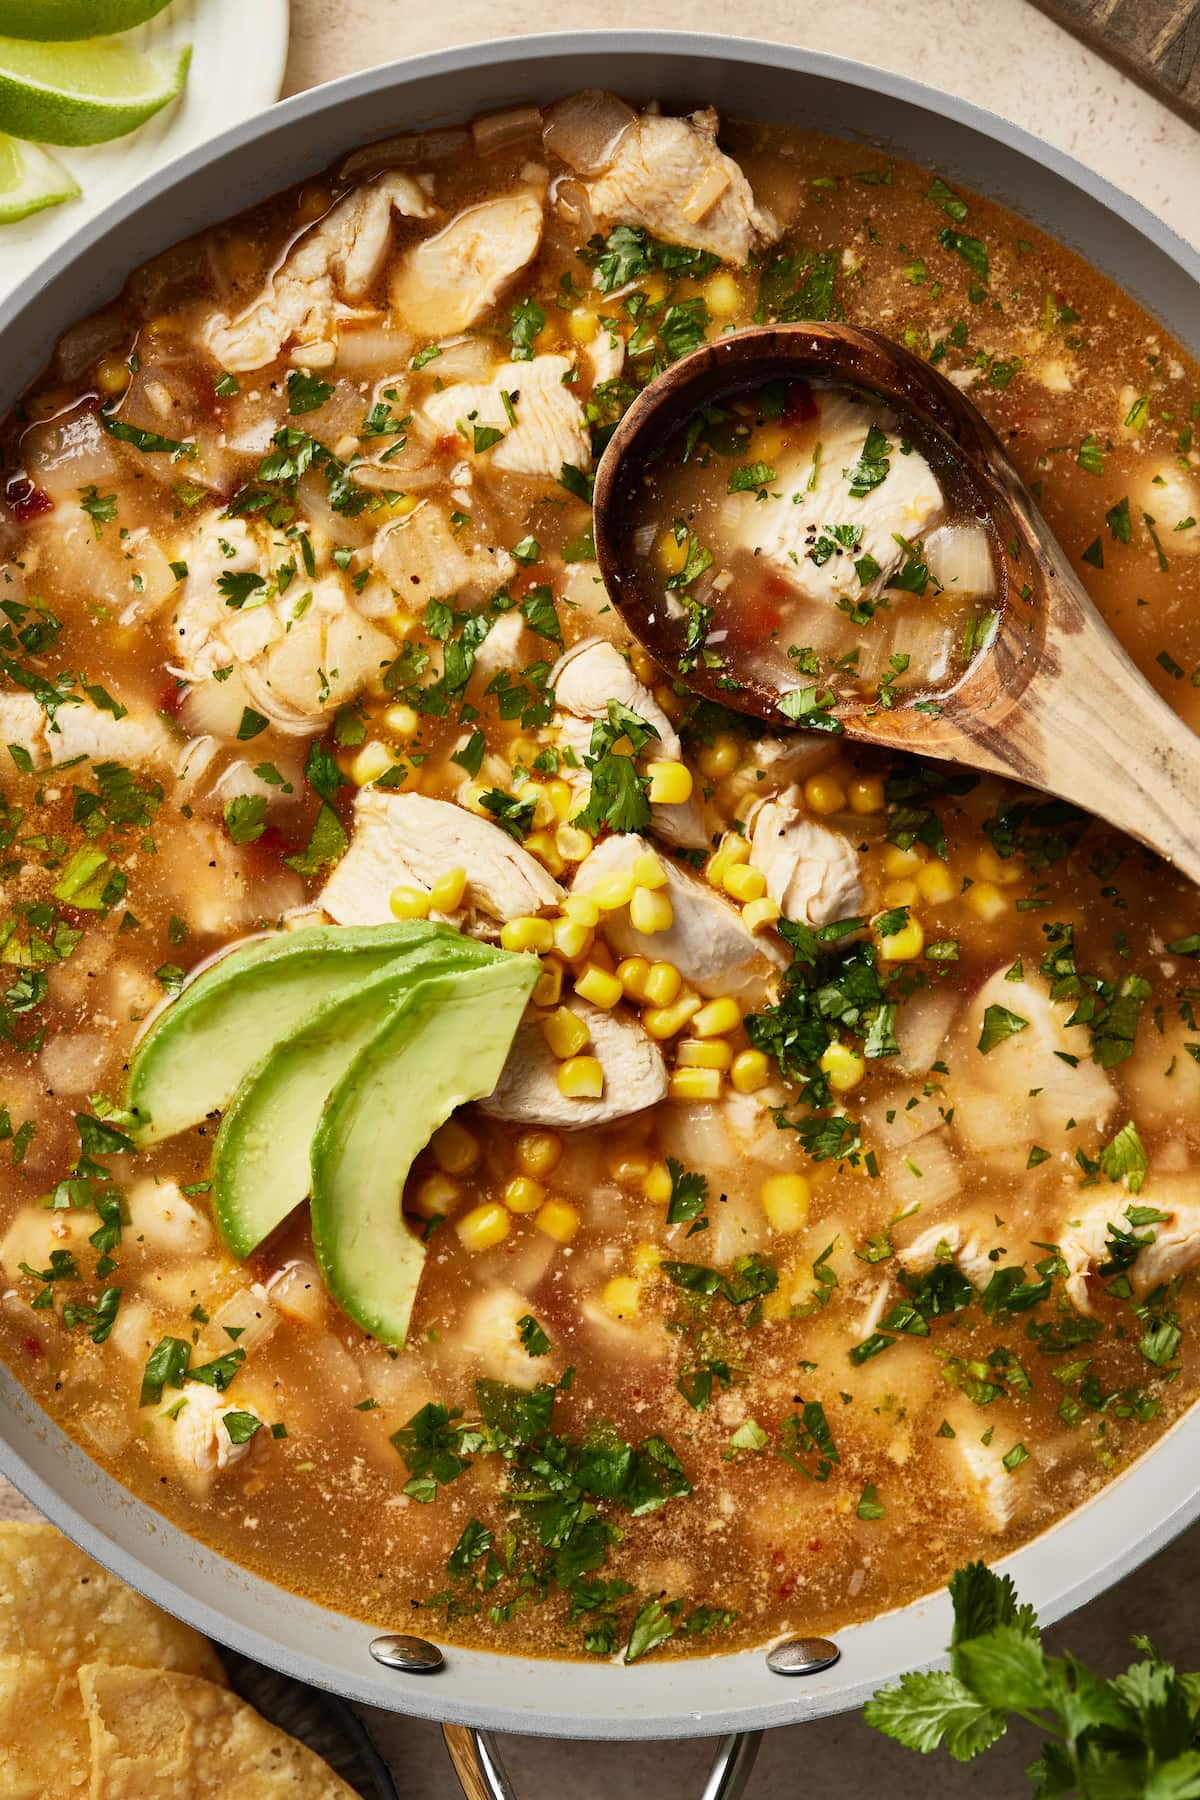 A pot of Mexican chipotle lime chicken soup garnished with avocado slices.